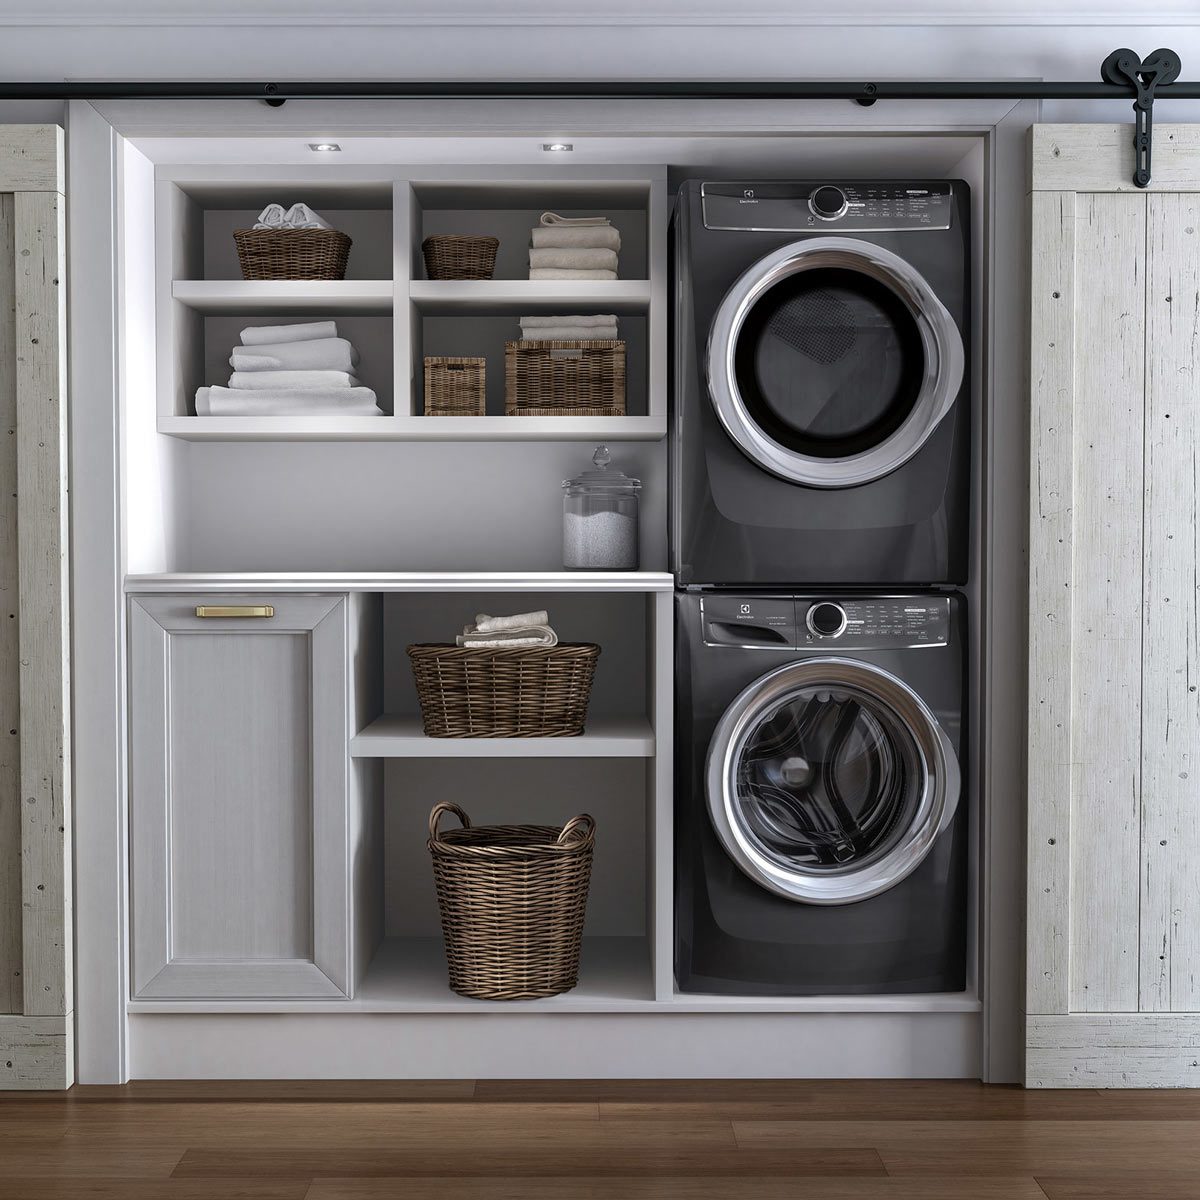 Is It Better to Stack a Washer and Dryer or Leave Them Side by Side?